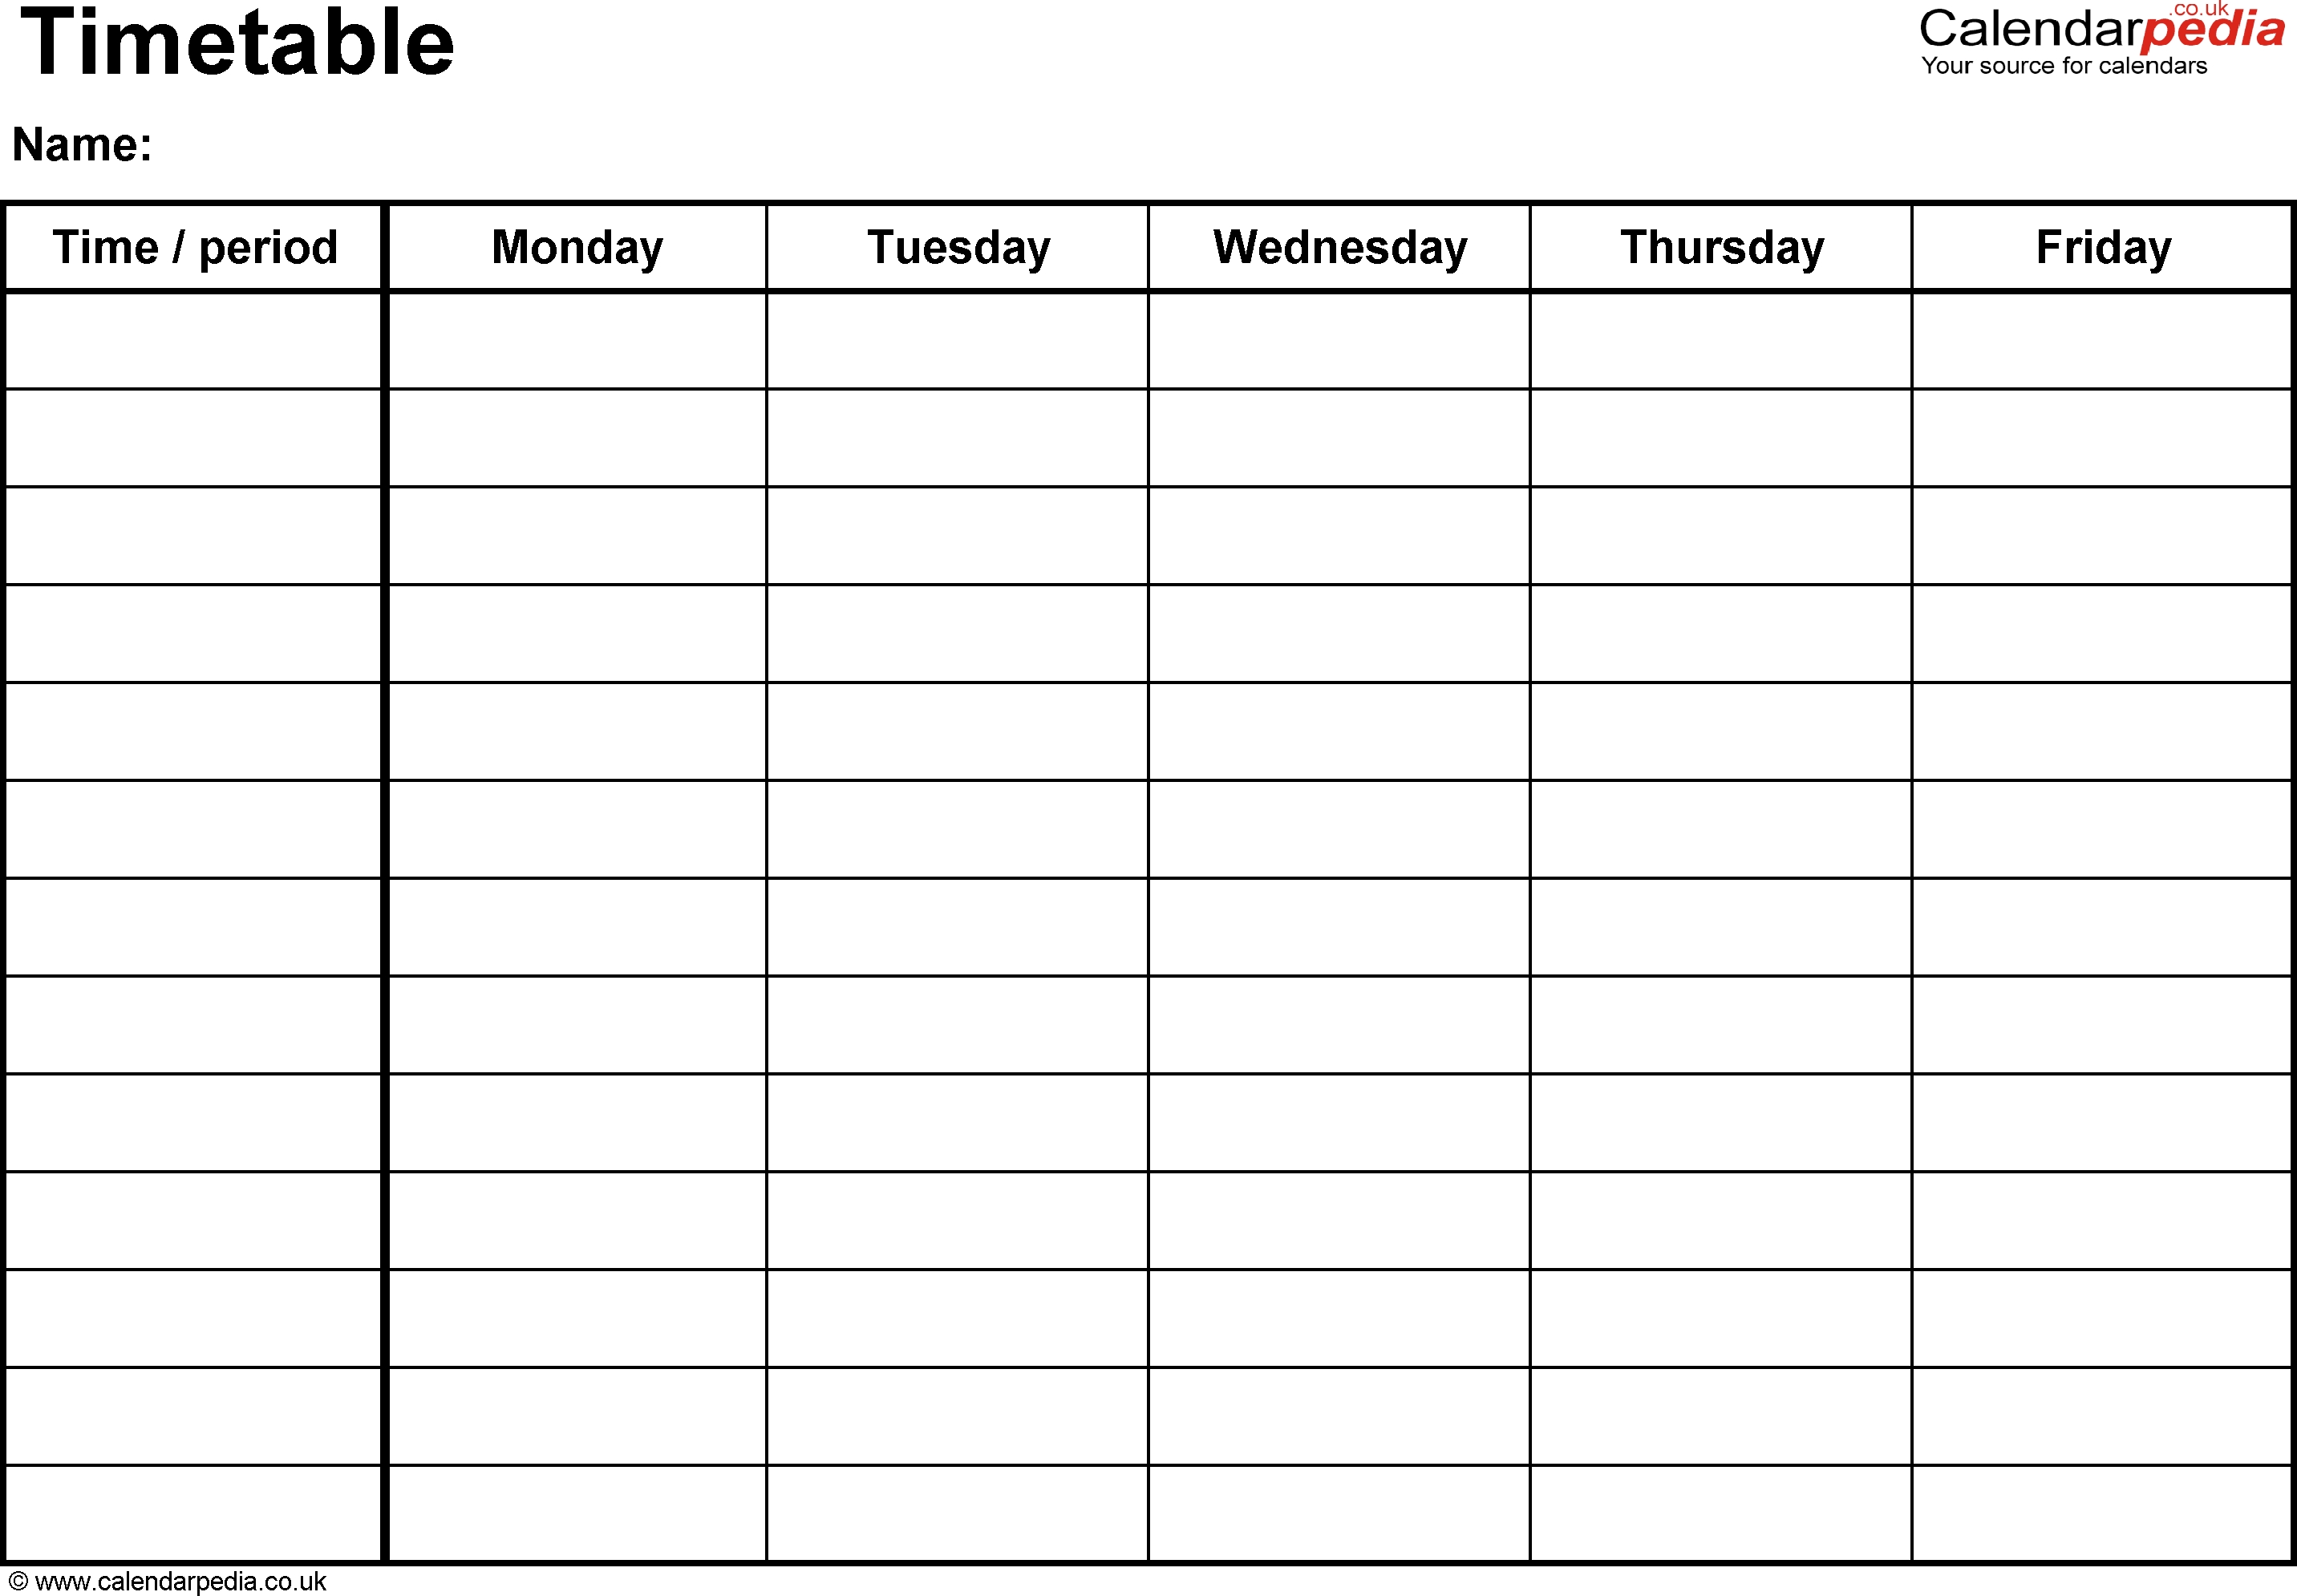 Calendar Timetable Template Timetables As Free Printable Templates intended for 30 Day Calendar With Circle With A Line Thru It